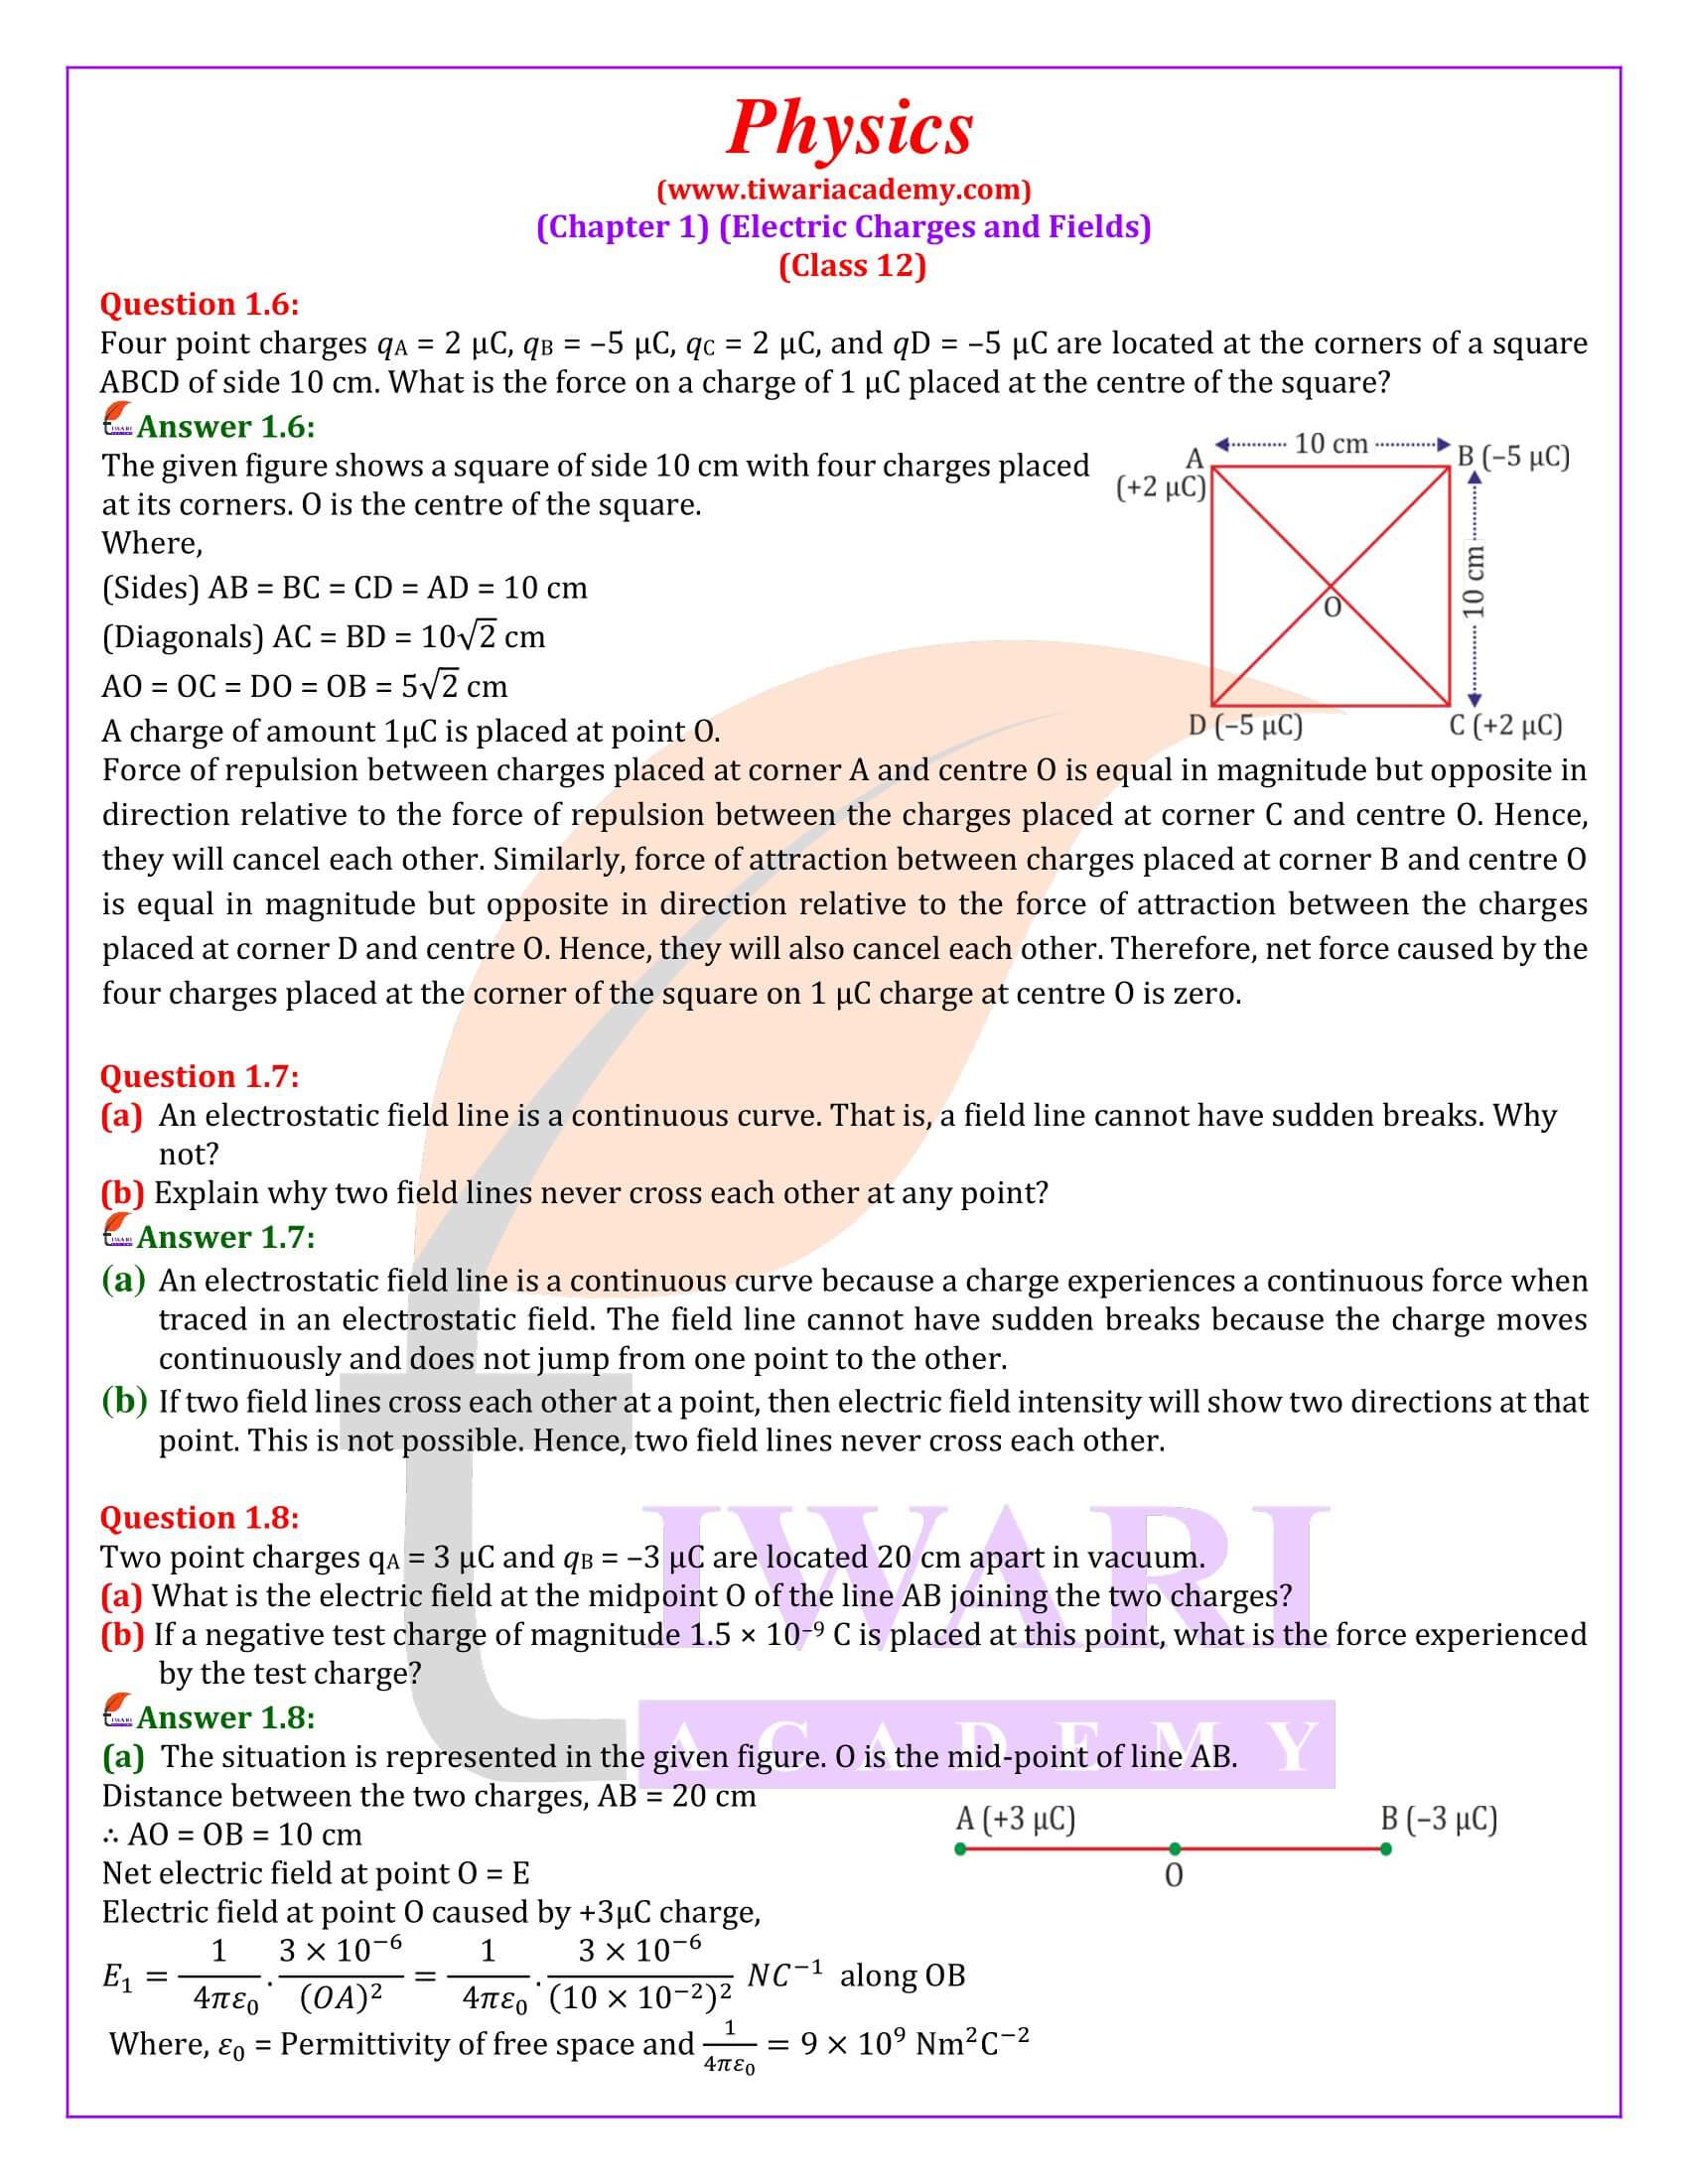 NCERT Solutions for Class 12 Physics Chapter 1